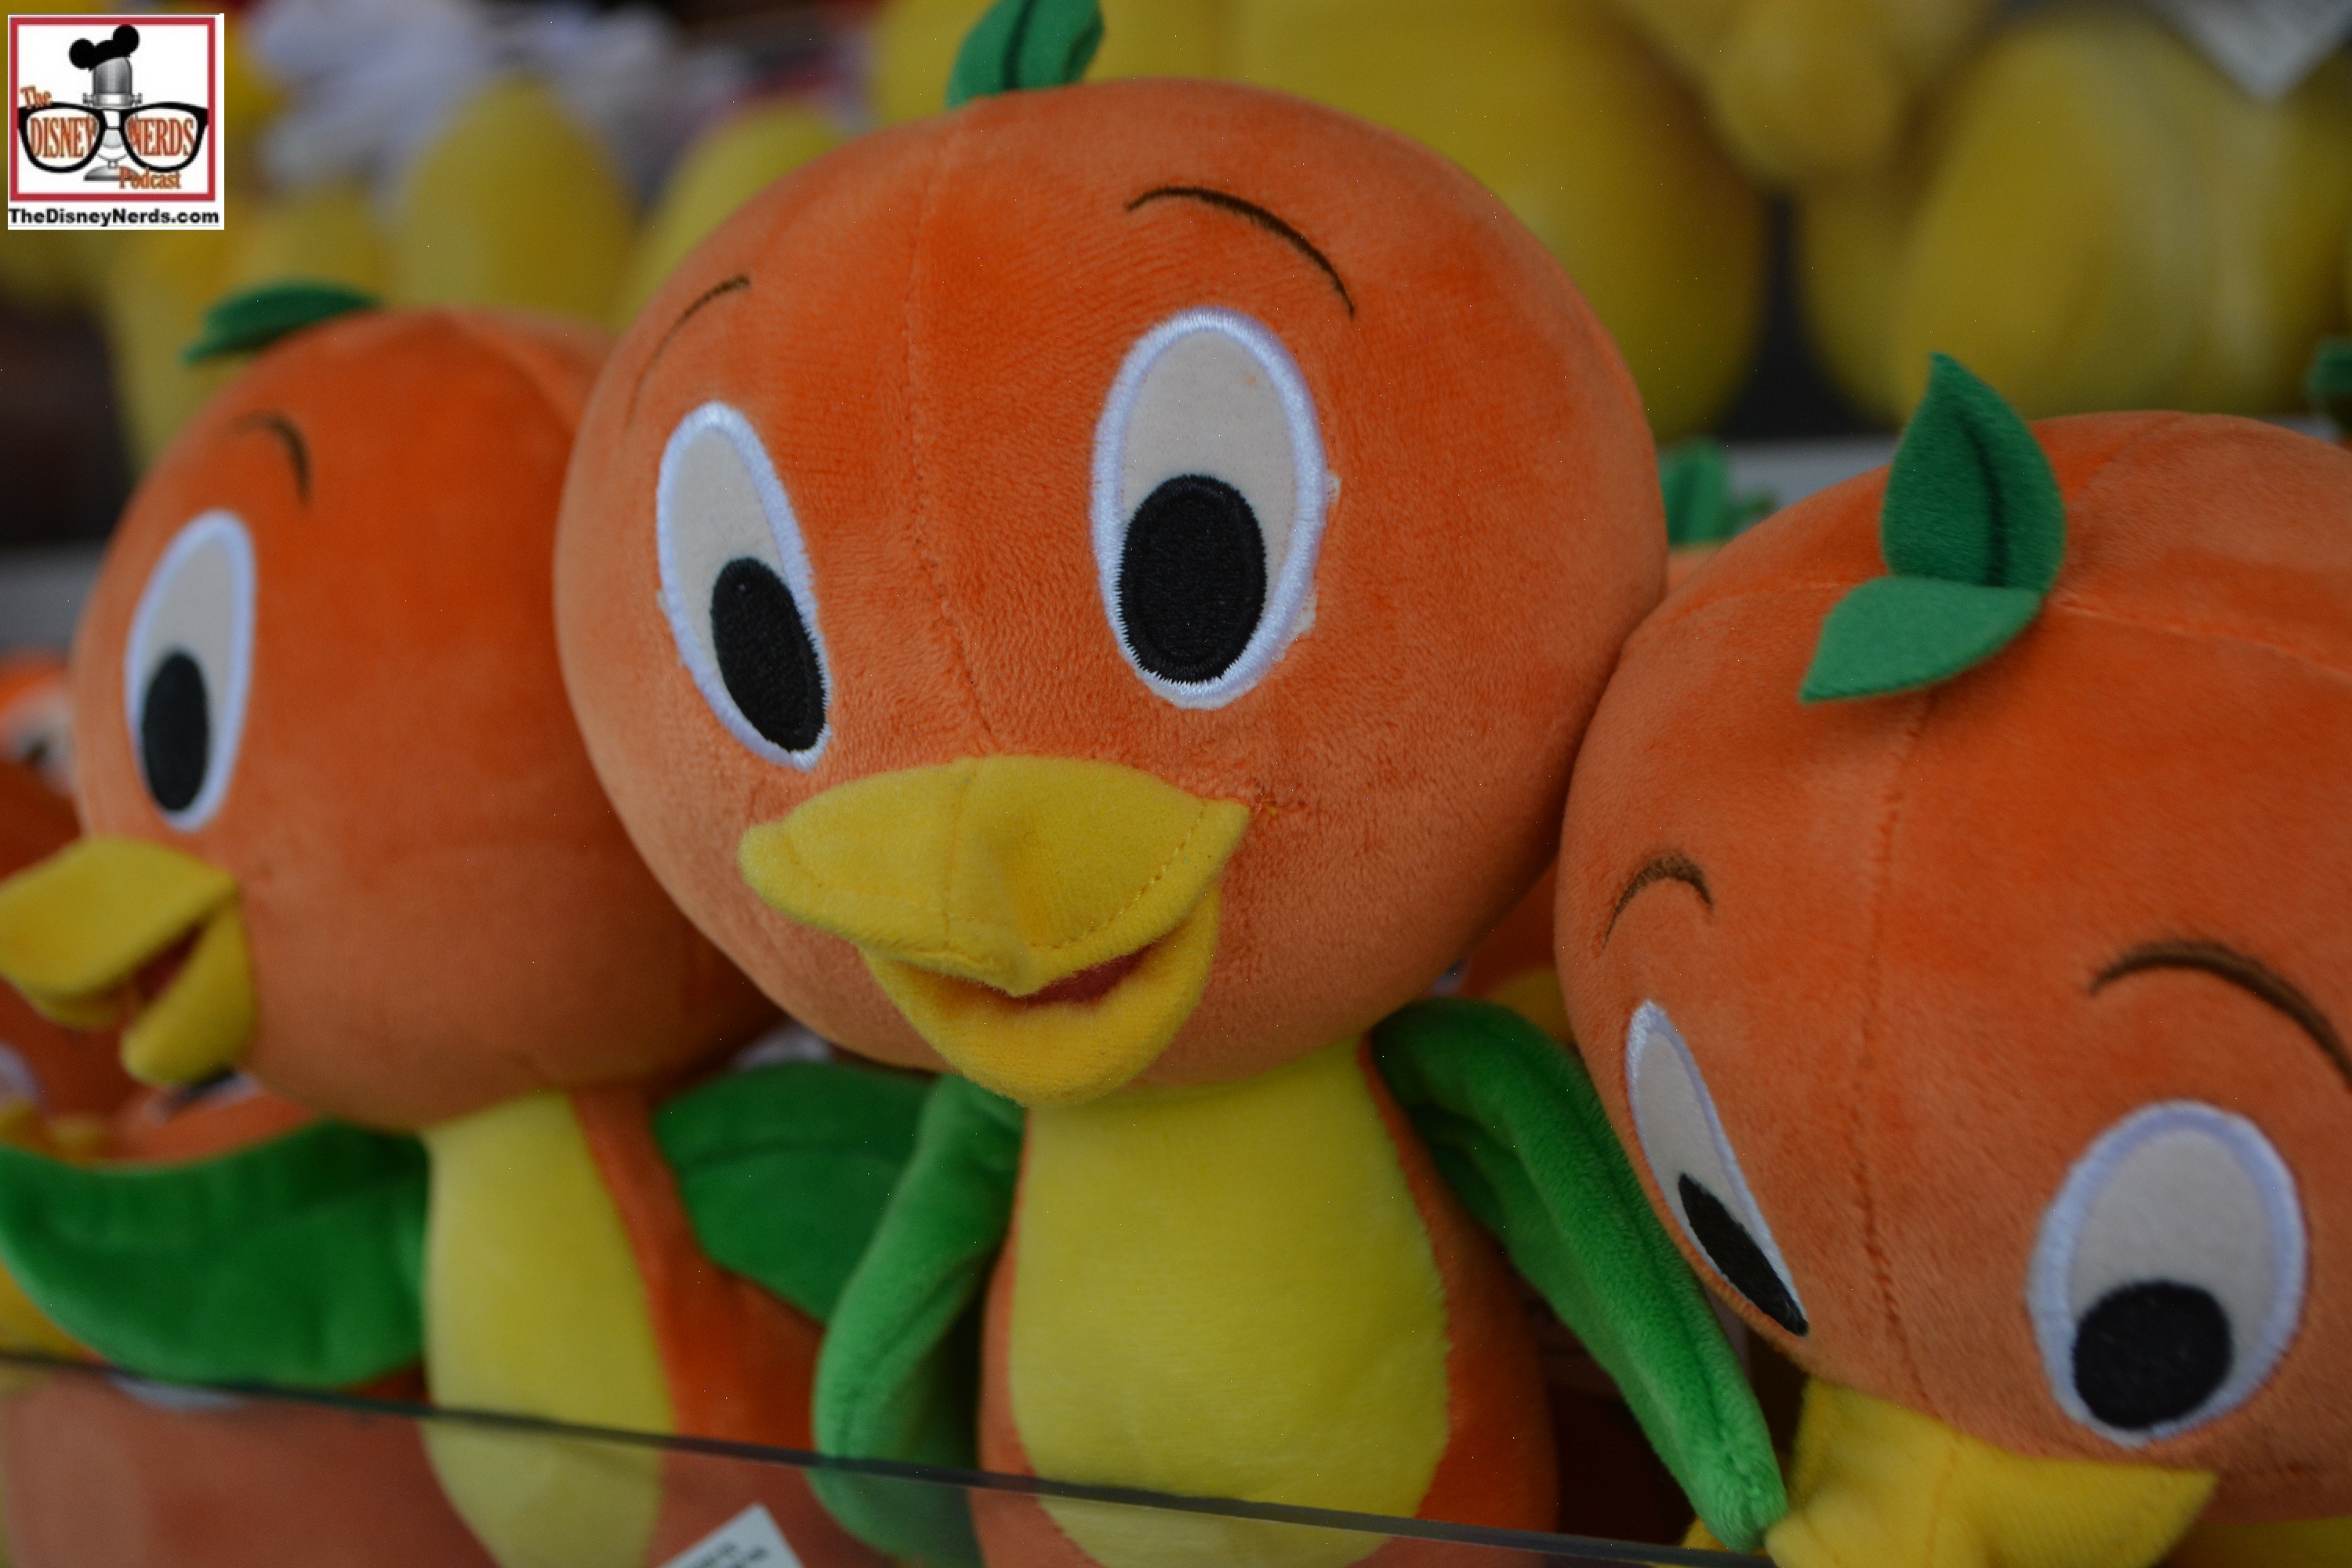 Maybe a Little Orange Bird land is in the works??